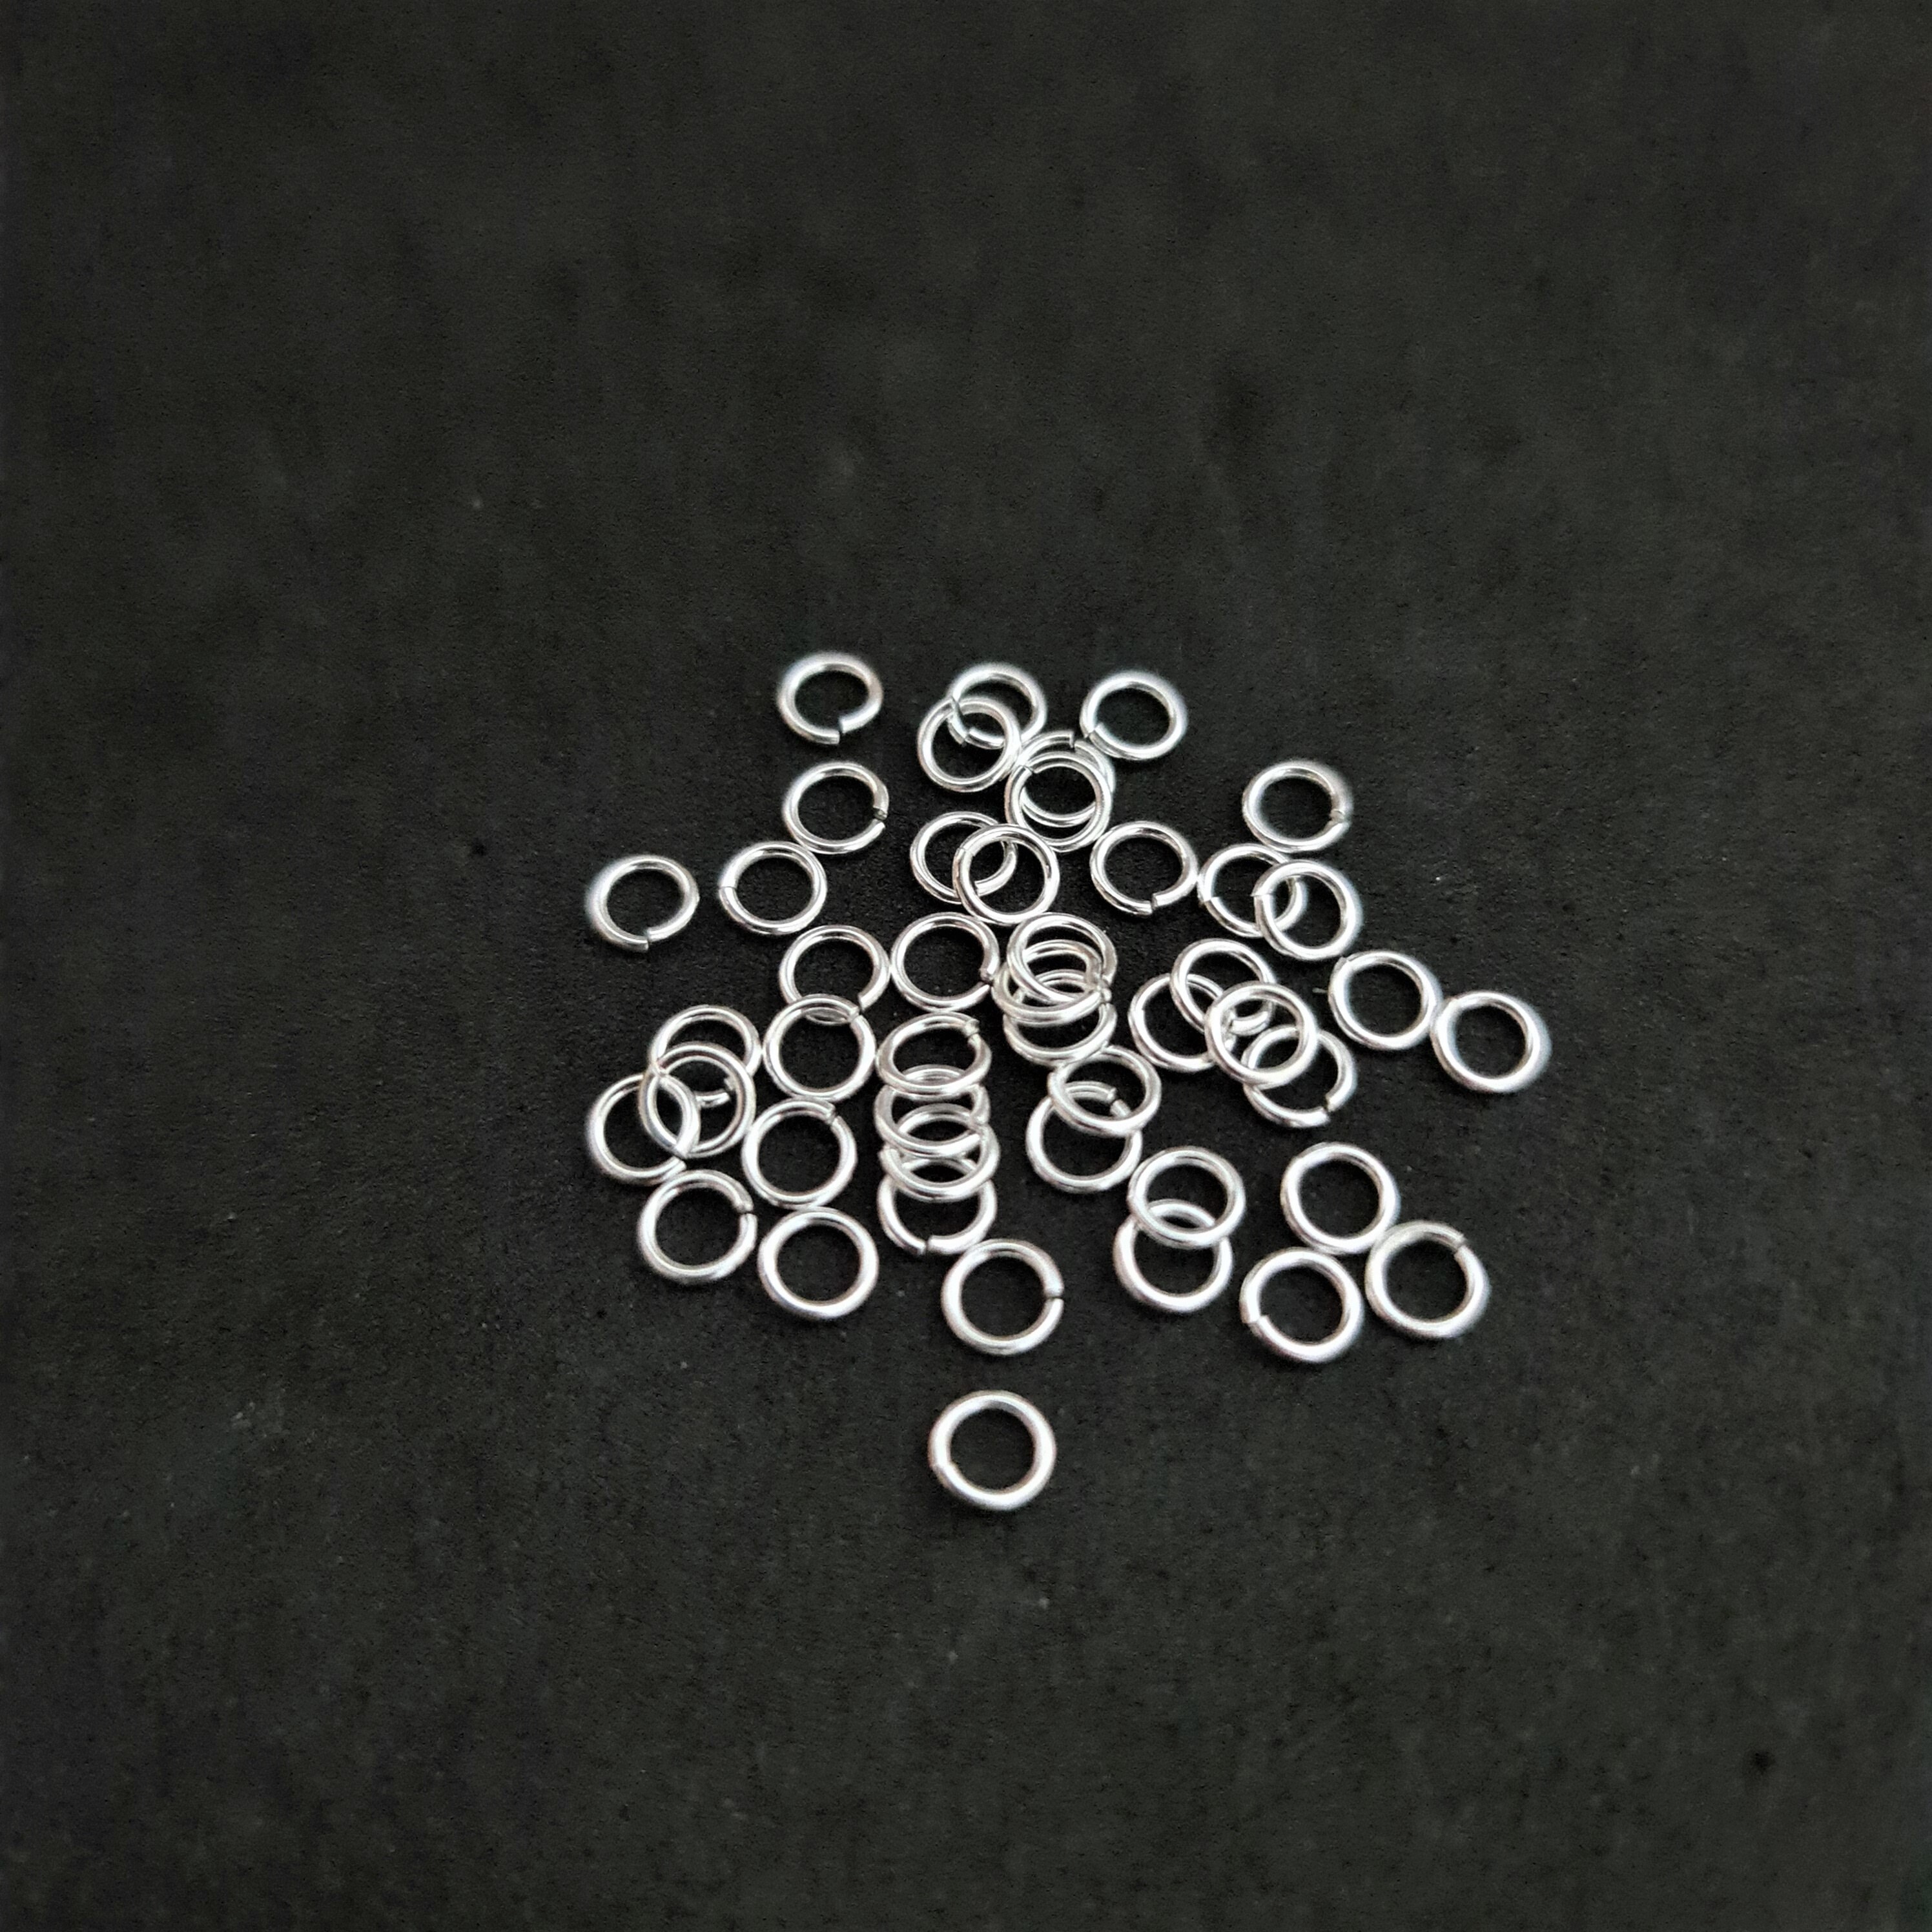 20 Pcs Bag of 4 mm 22g Silver Open Jump Rings